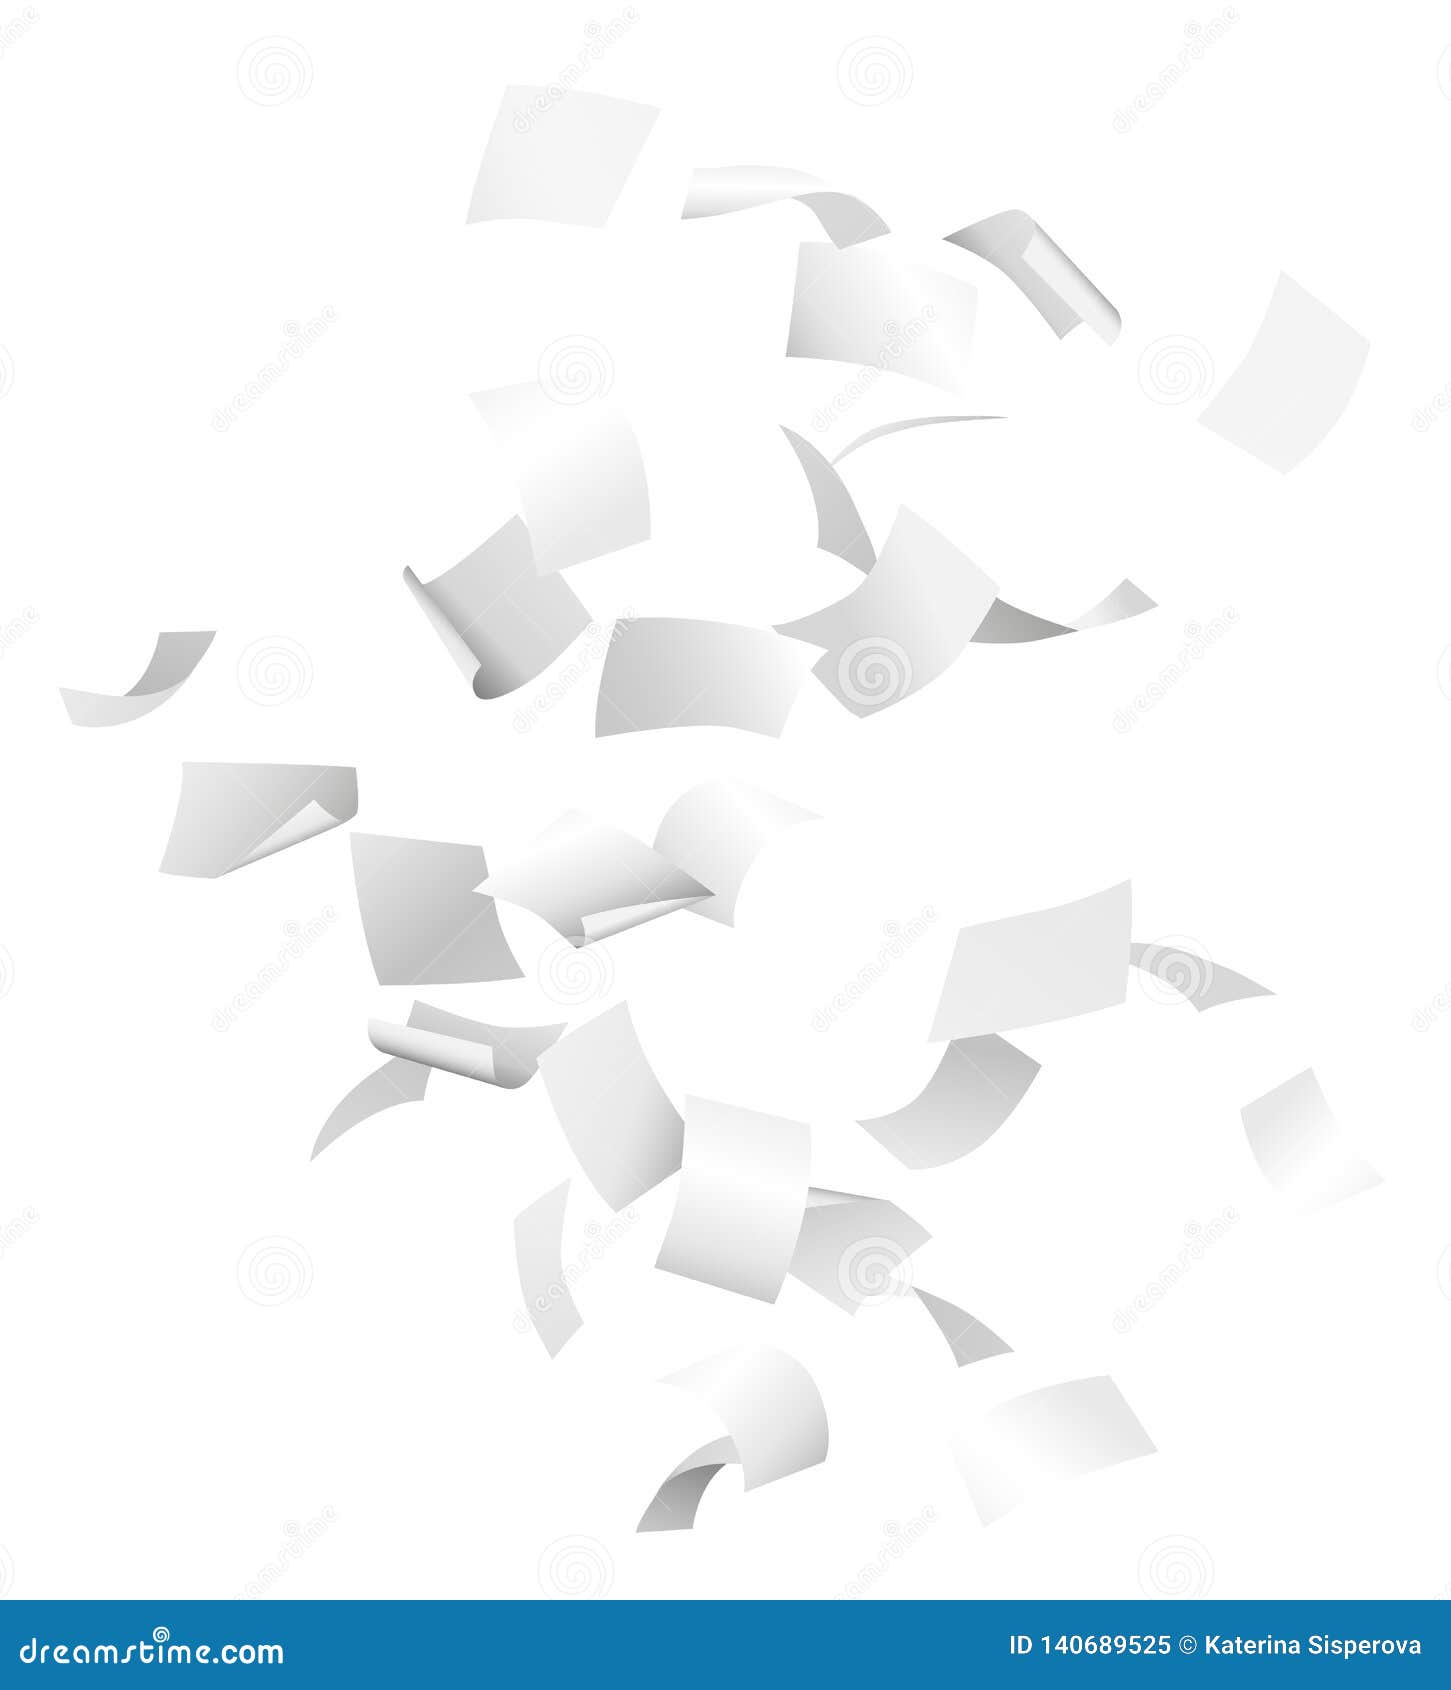  white flying papers in the air  on white background